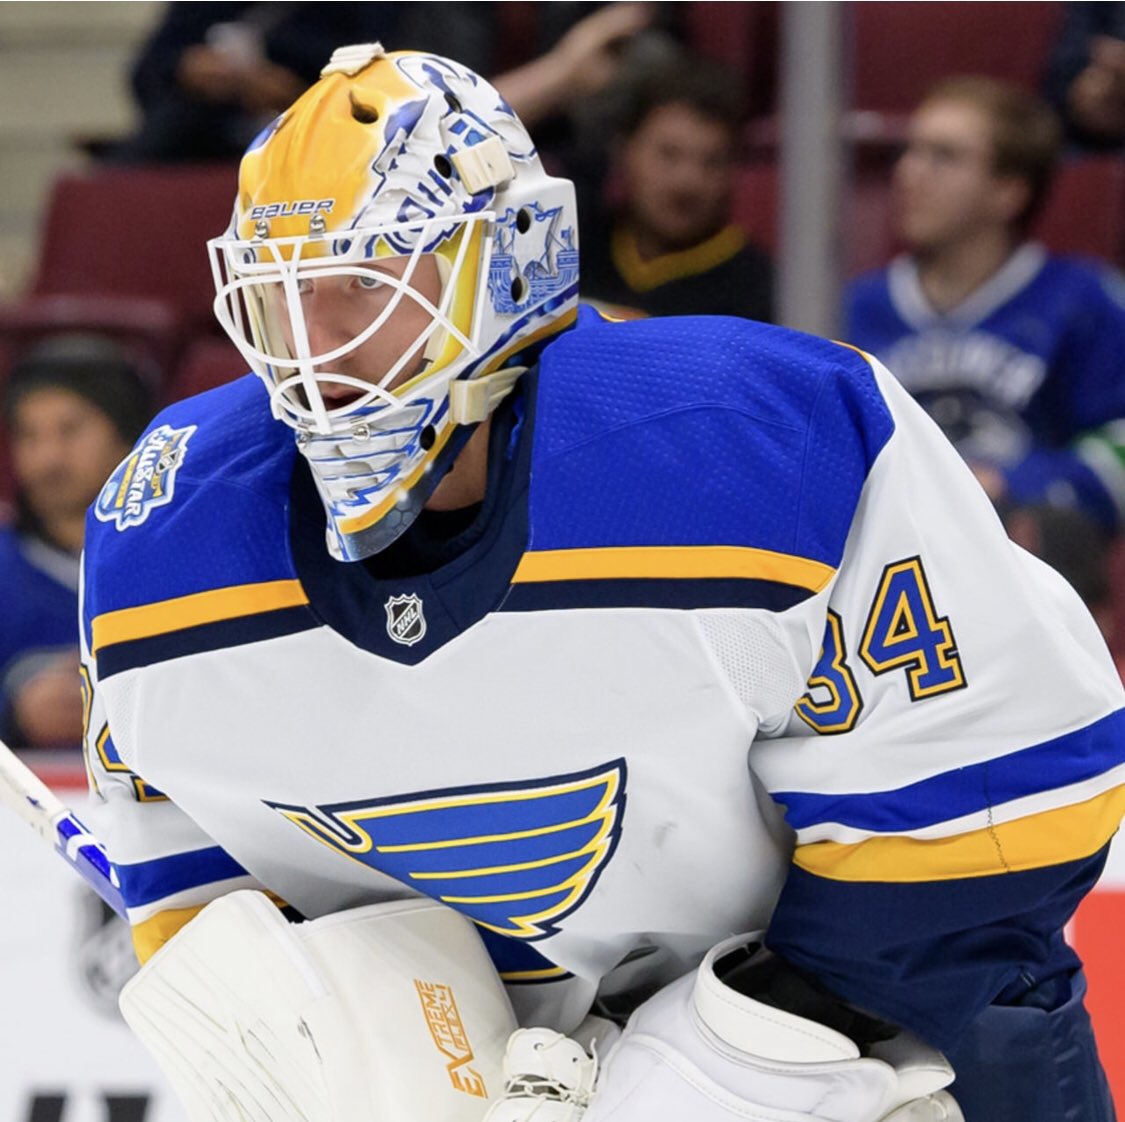 Can confidently say there’s nowhere else Canadiens fans will find out more about their new goalie  @34jallen than InGoal; we’ll start with a link to our LENGTHY podcast interview during pause:  https://ingoalmag.com/magazine/2020/06/02/ingoal-radio-episode-72-jake-allen/